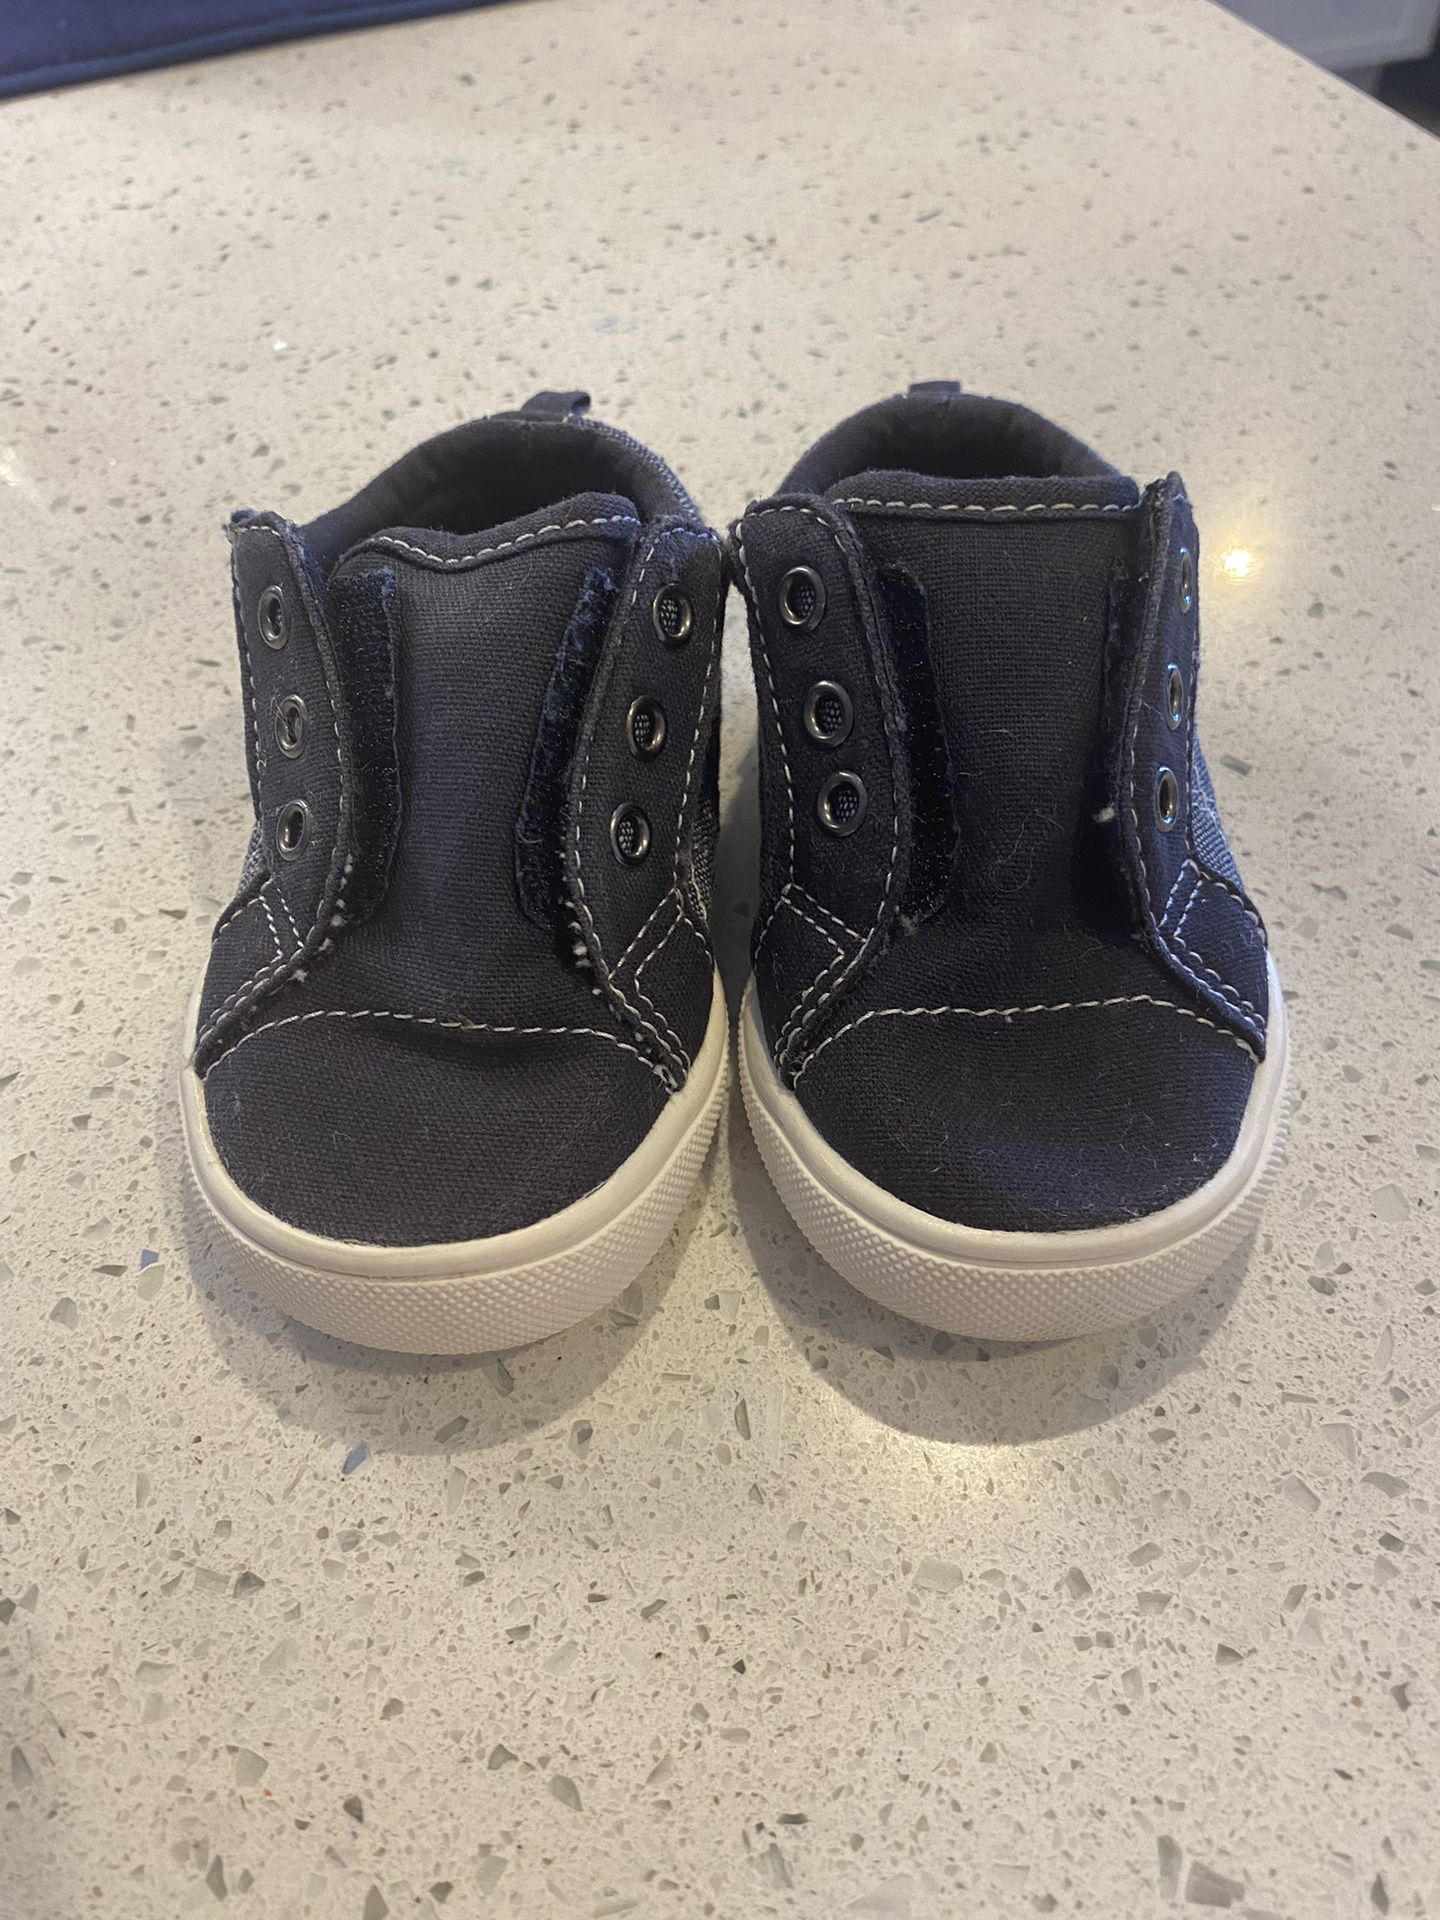 Toddler Boy Shoes - 3 Pairs Excellent Condition 